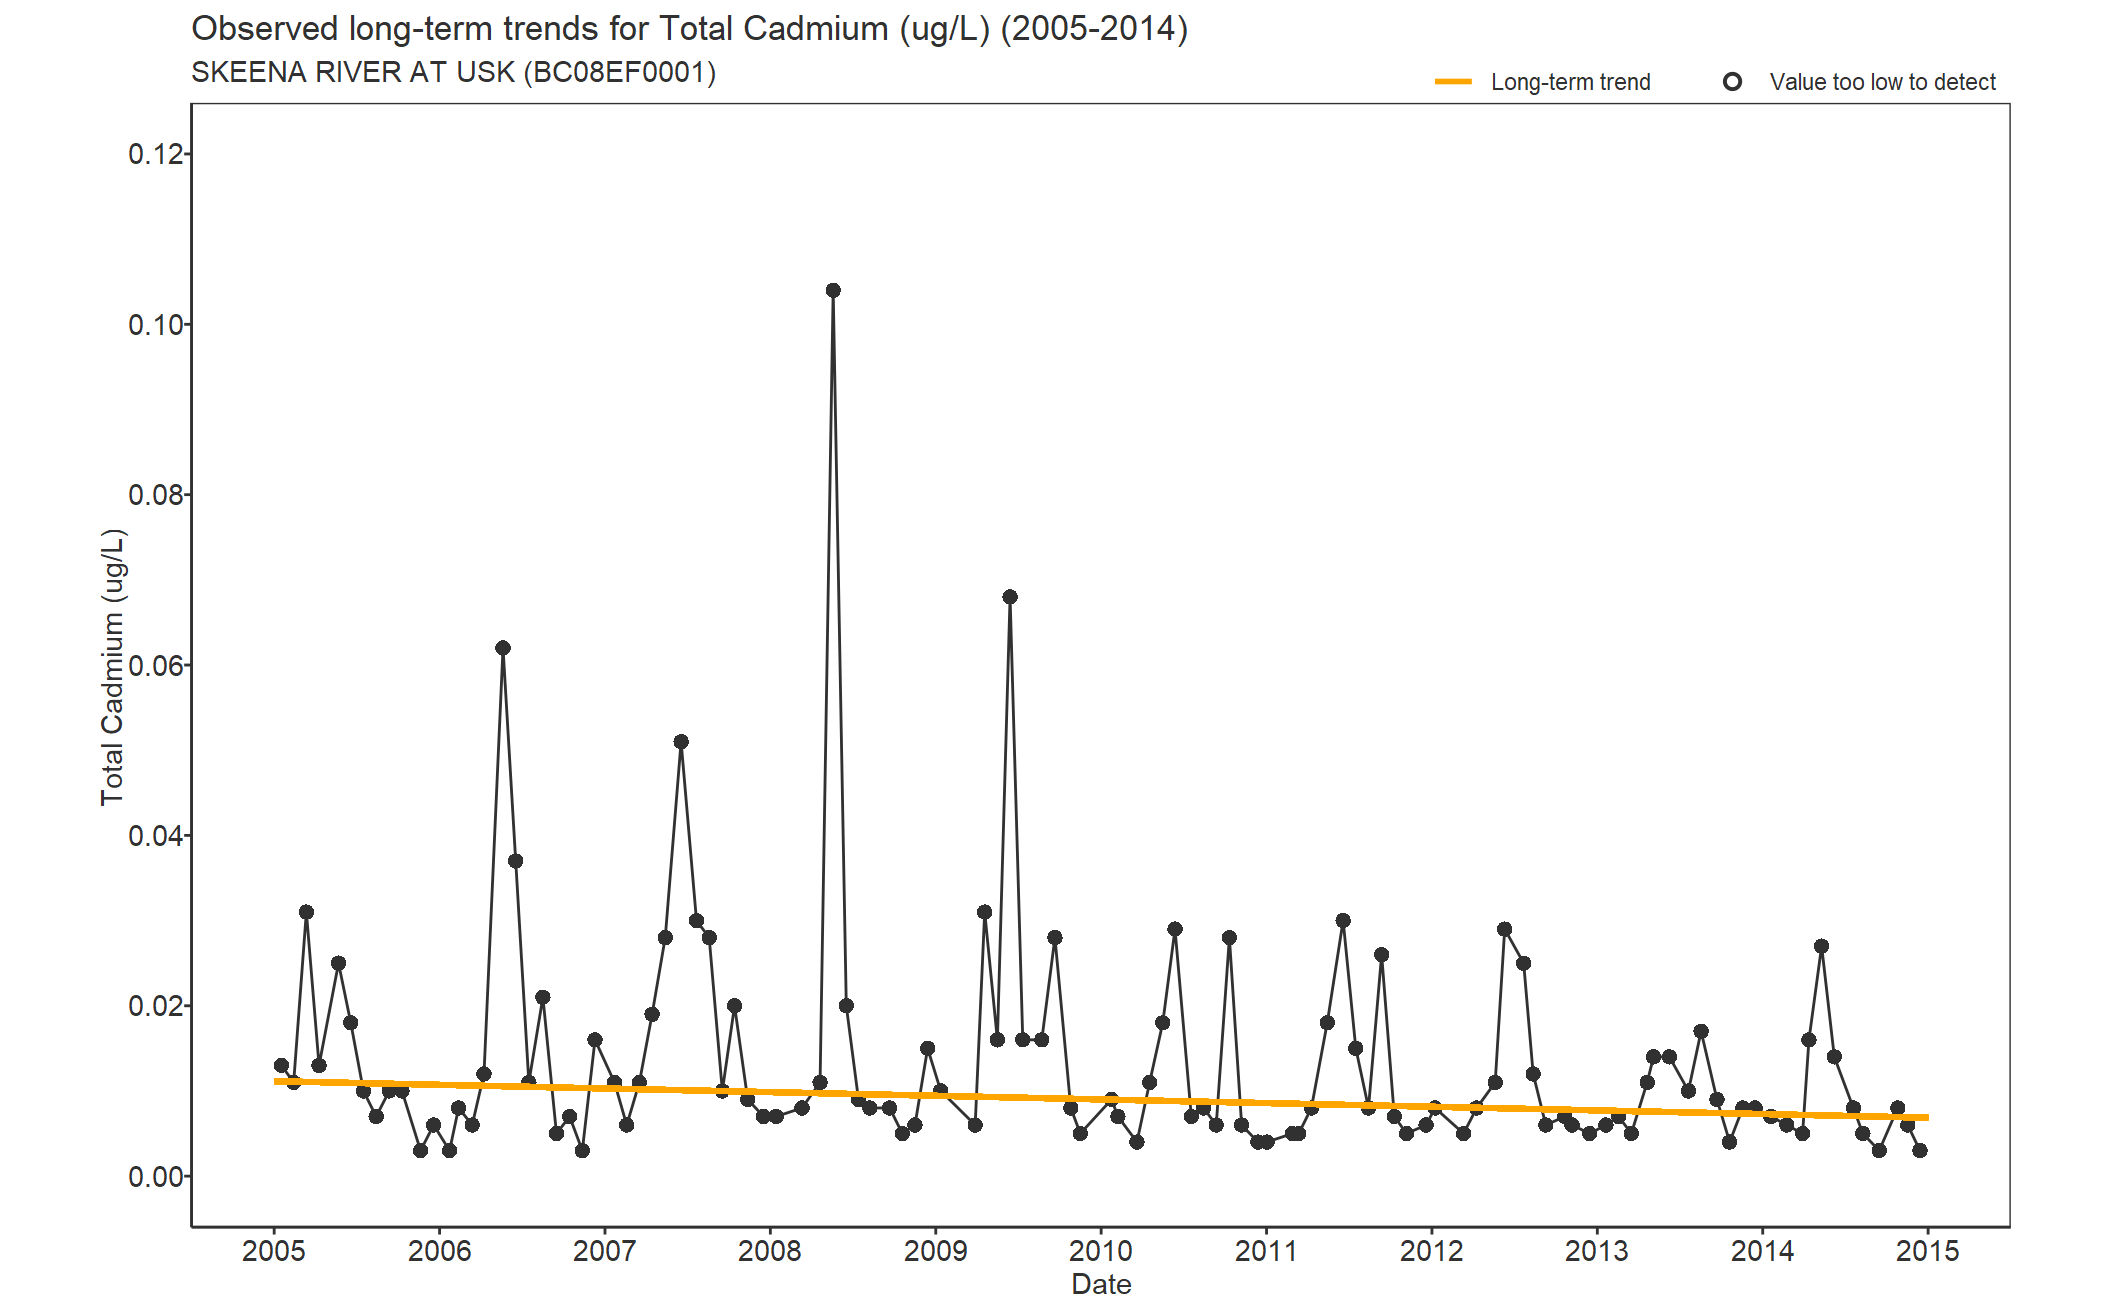 Observed long-term trends for Total Cadmium (2005-2014)